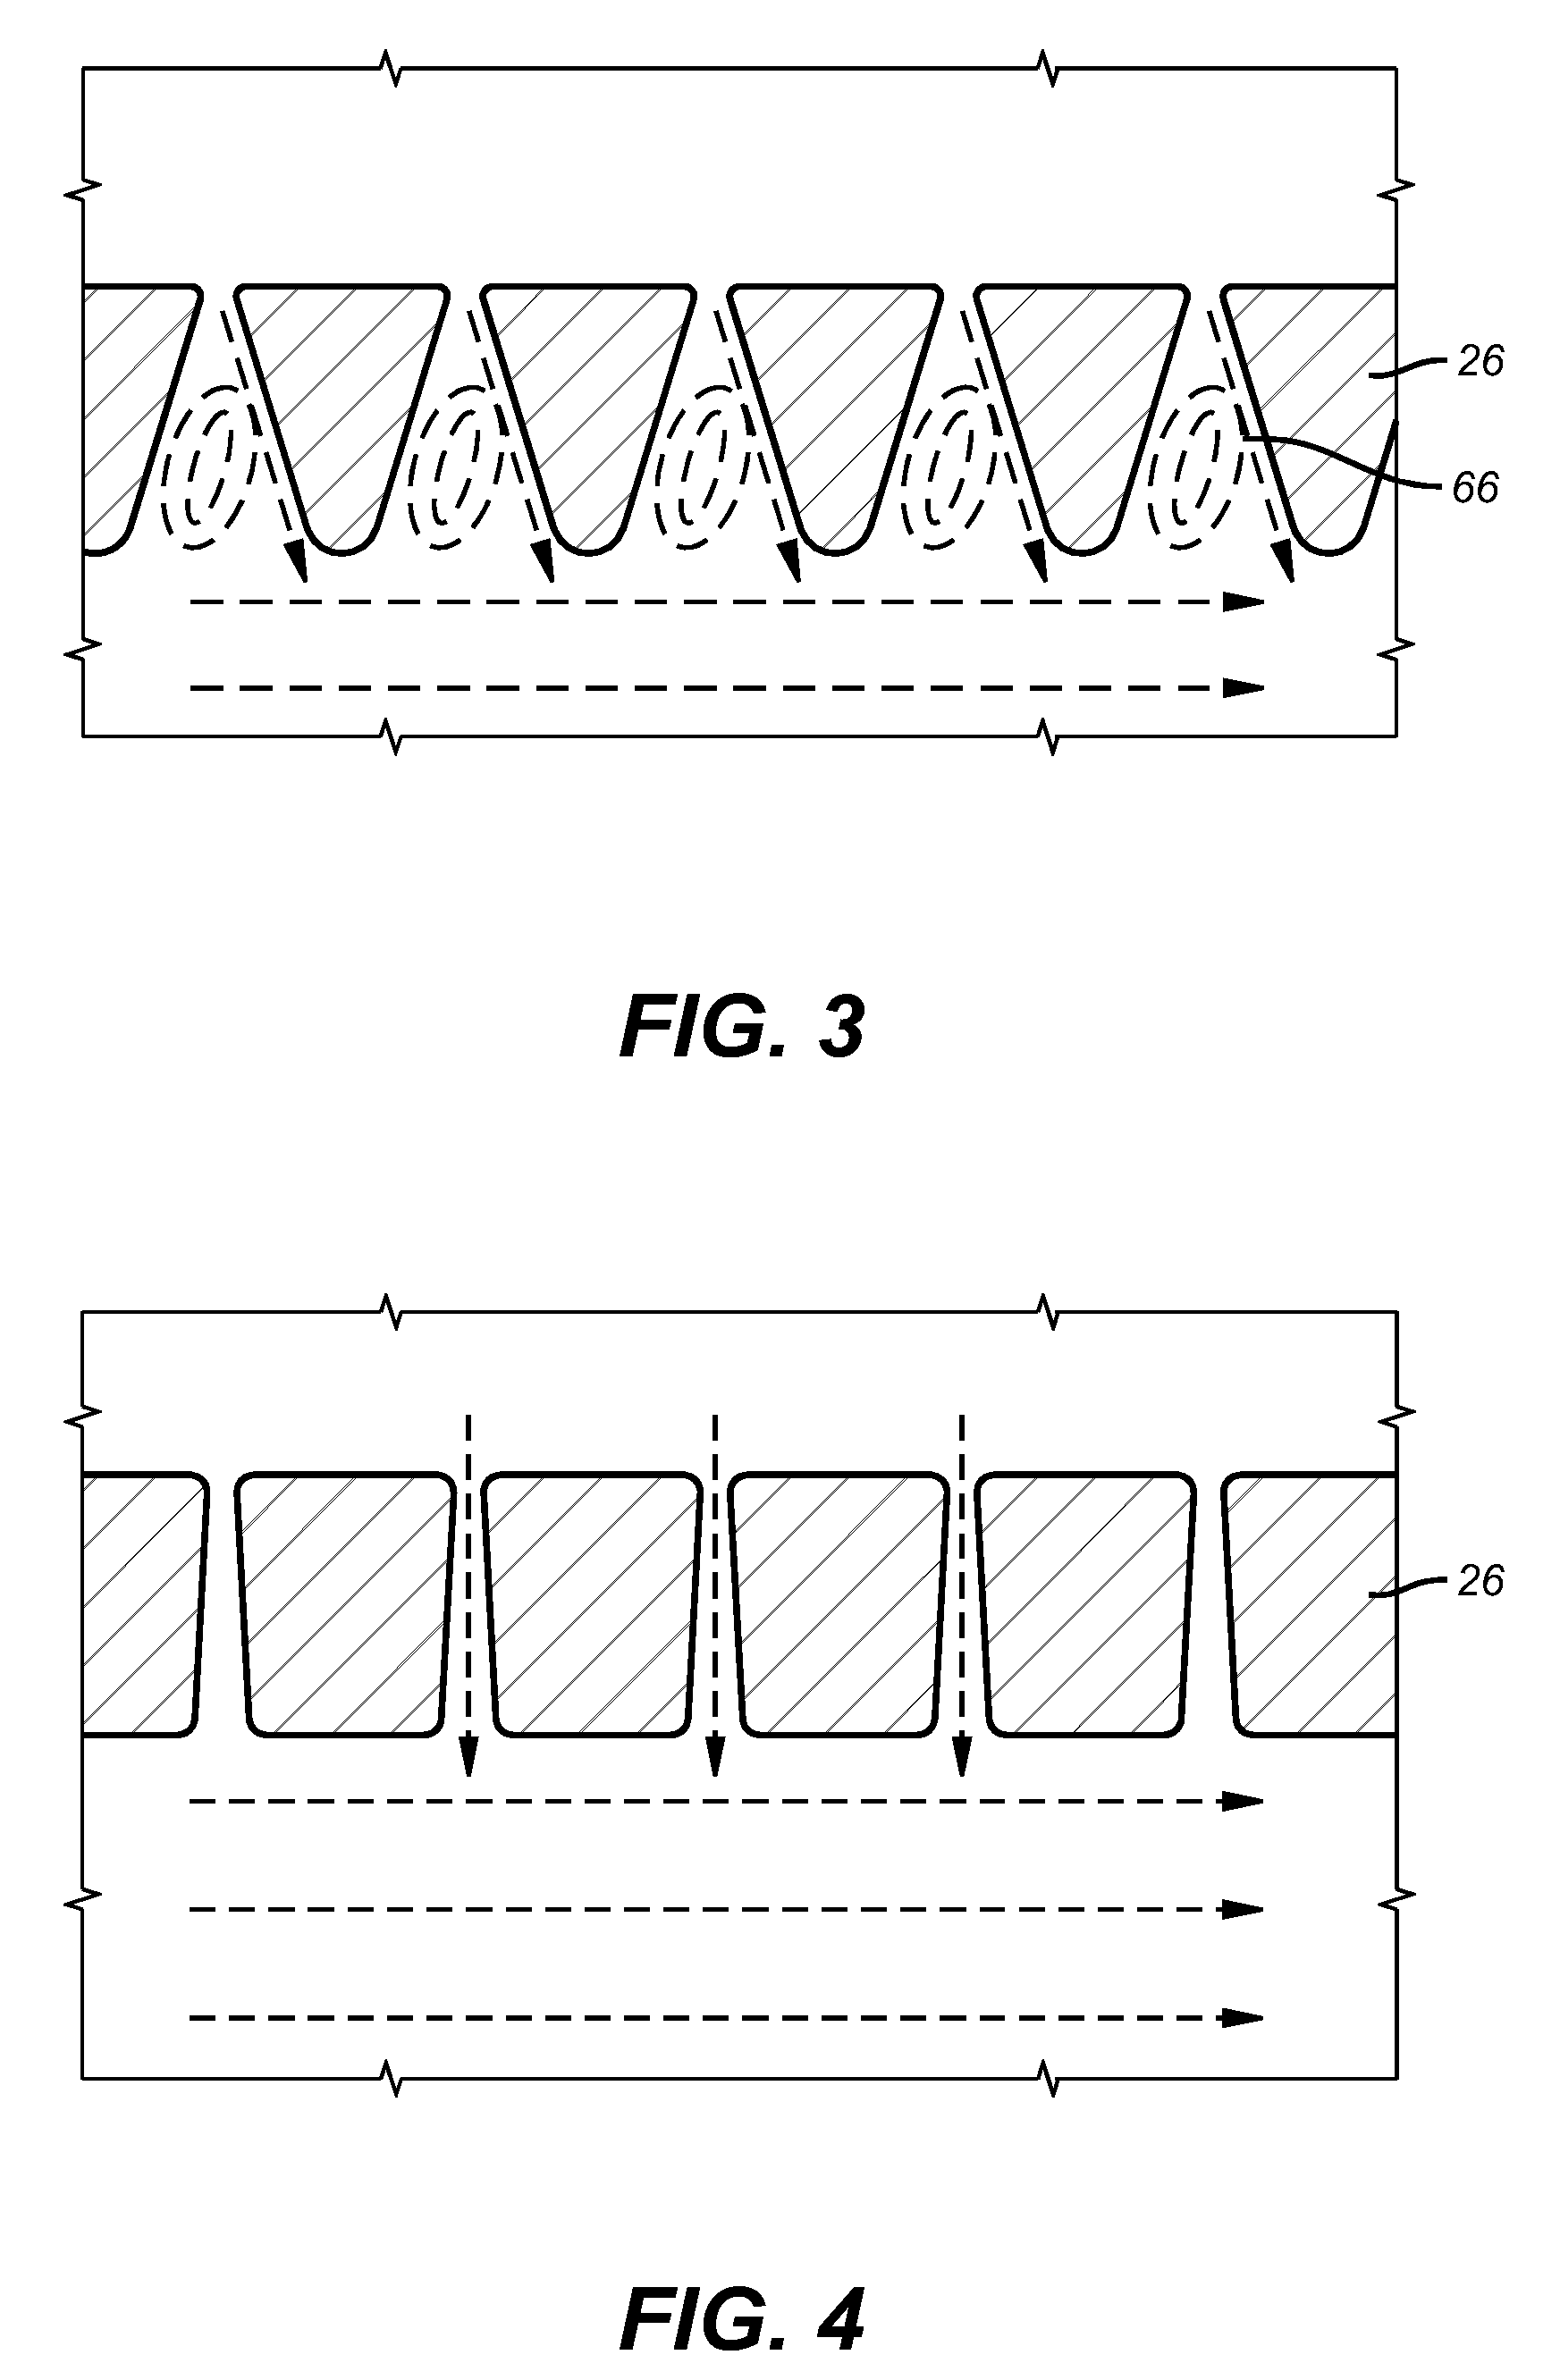 Subterranean Screen with Varying Resistance to Flow